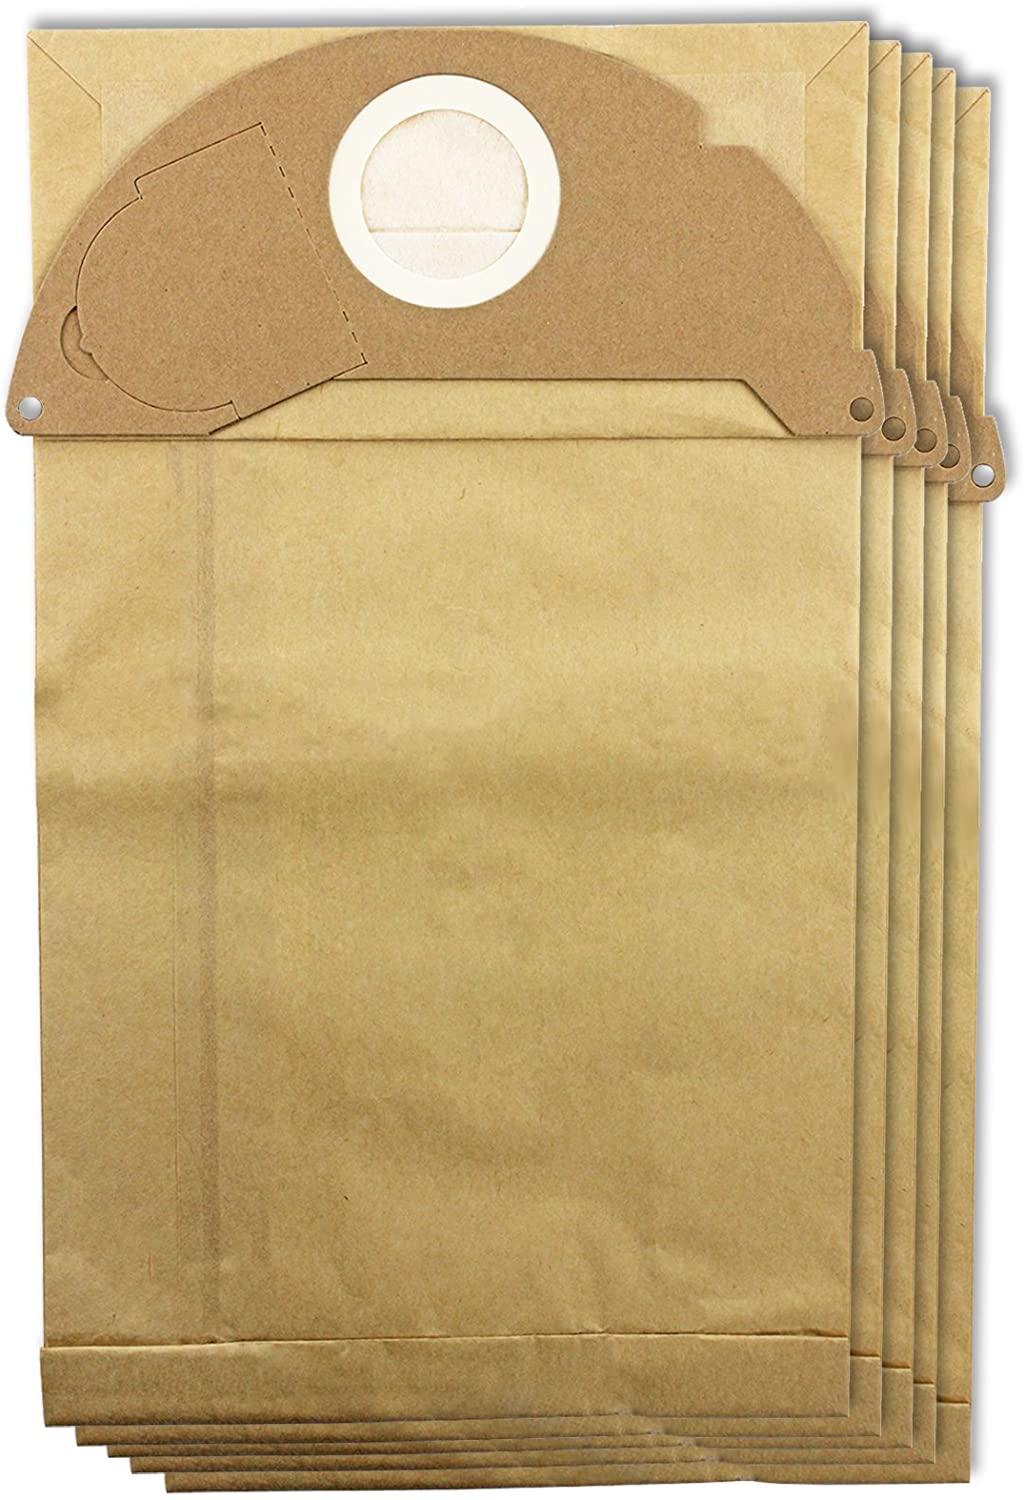 Strong Dust Bags for Karcher A2074PT WD2250 A2003 Vacuum Cleaners (Pack of 5 + Fresheners)